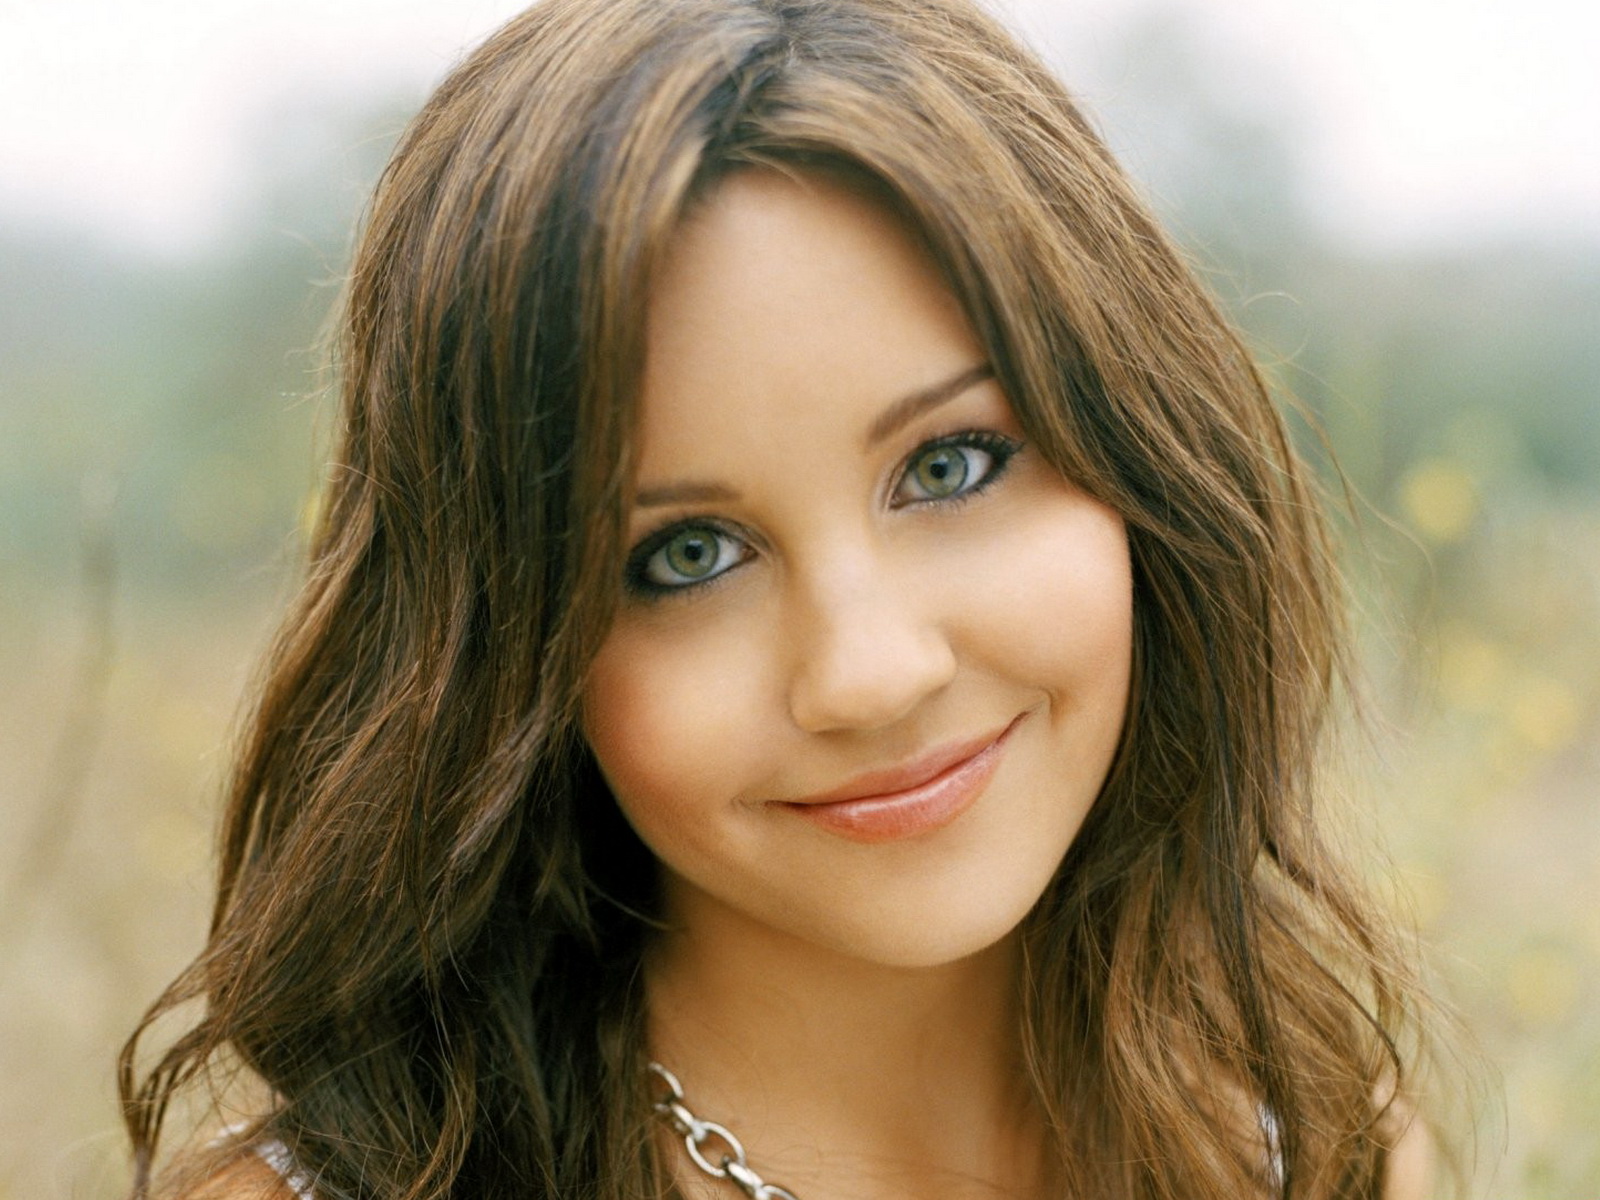 Pictures Of Amanda Bynes 5